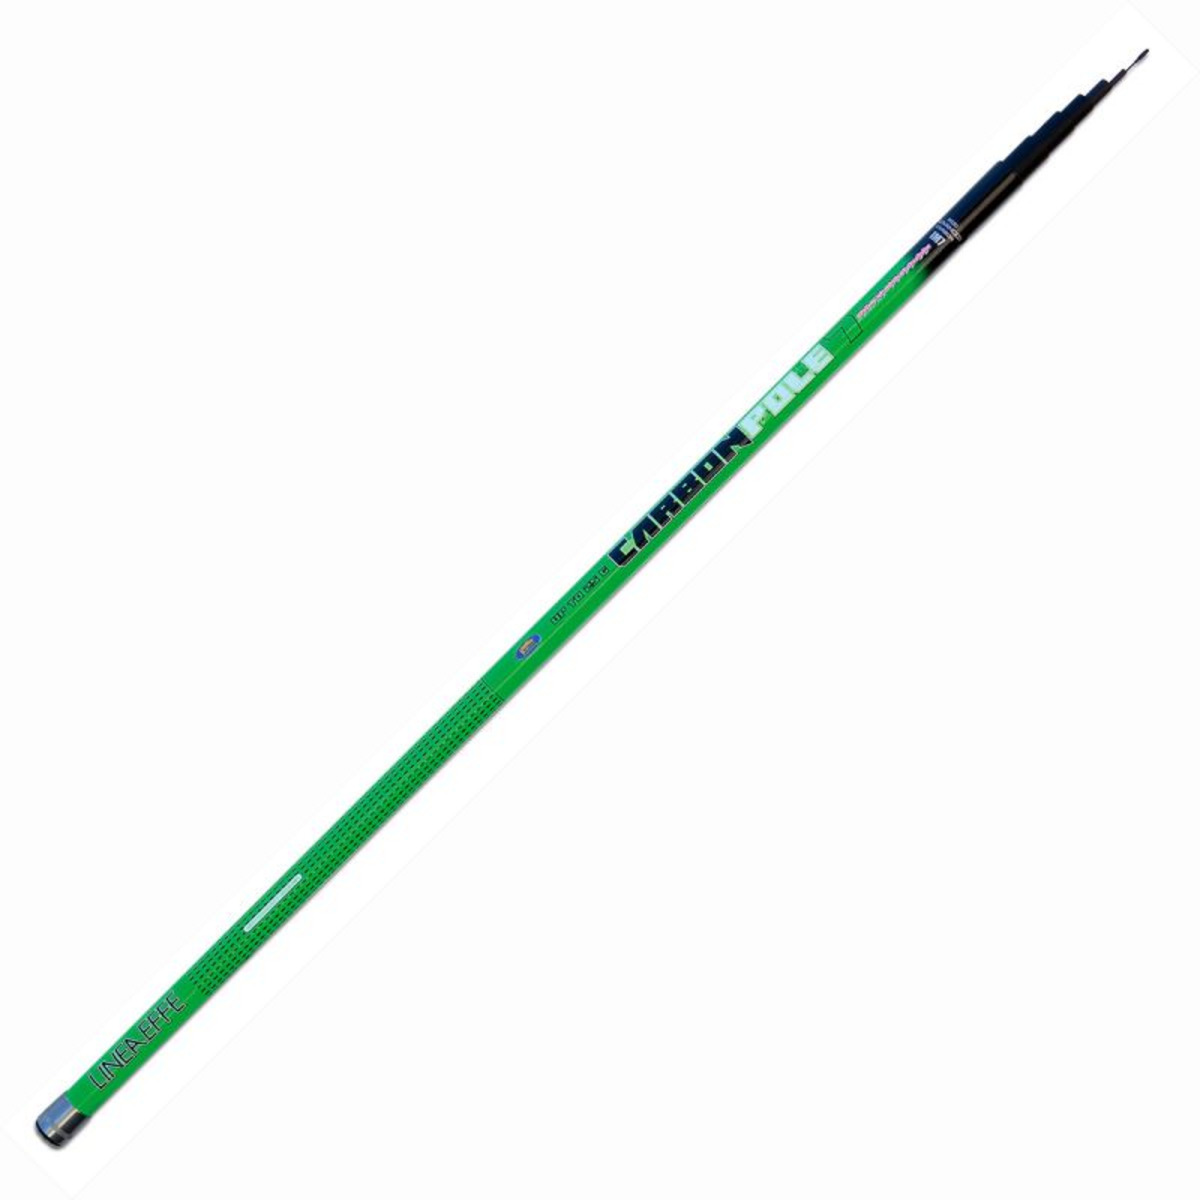 Lineaeffe Carbon Pole - 7.00 m - up to 25 g